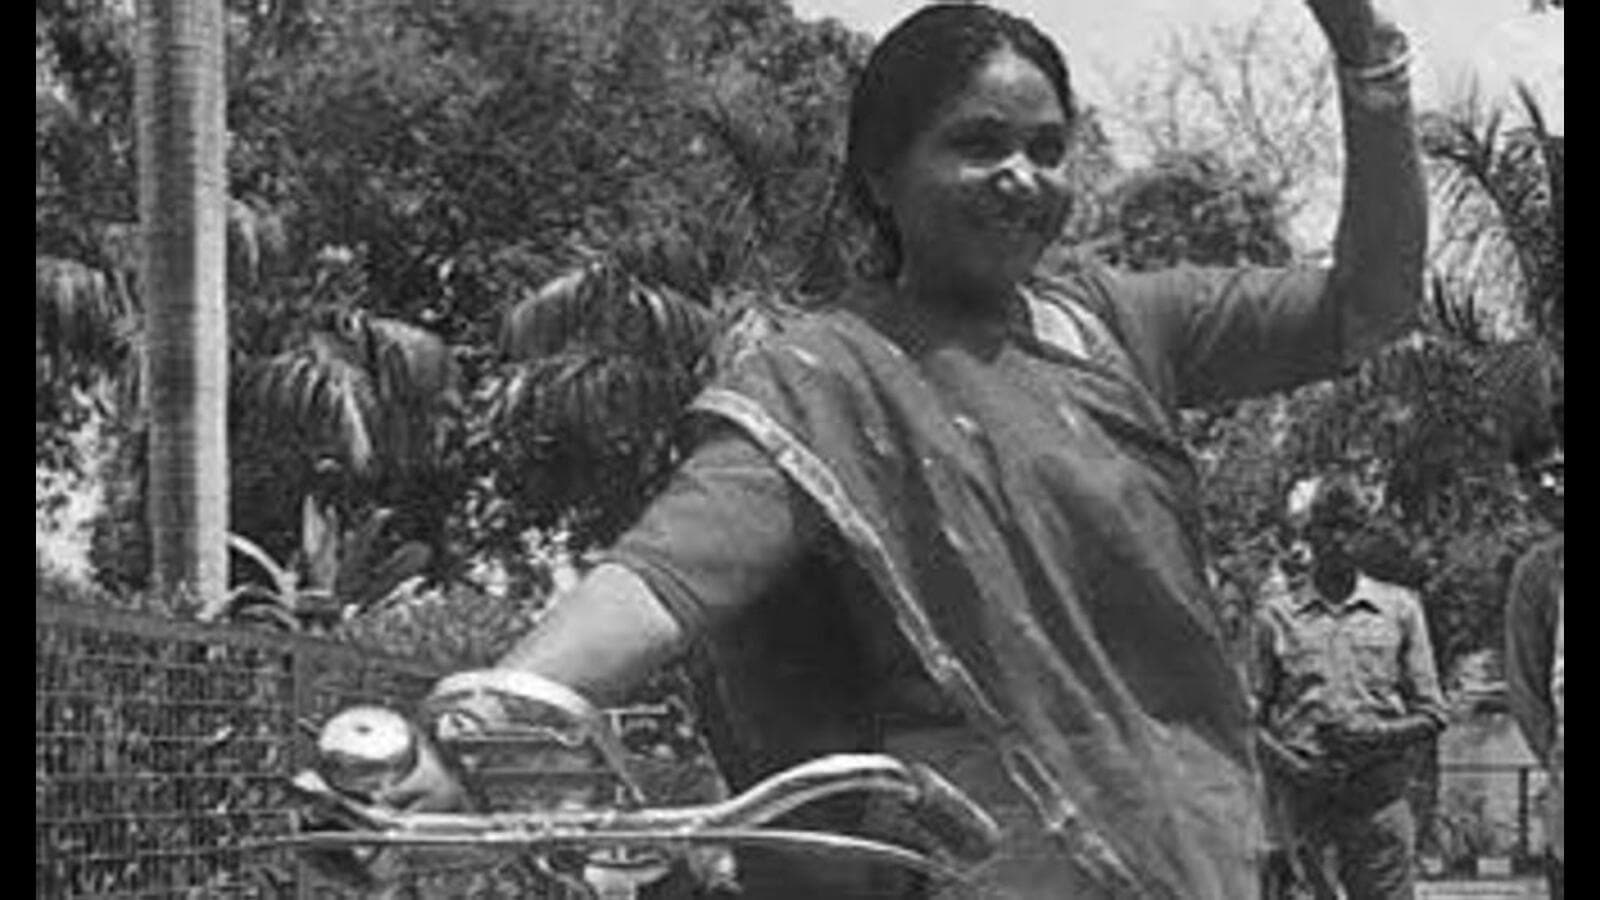 Phoolan Devis 54th birth anniversary Glimpses from the life of Bandit  Queen  Picture Gallery Others News  The Indian Express